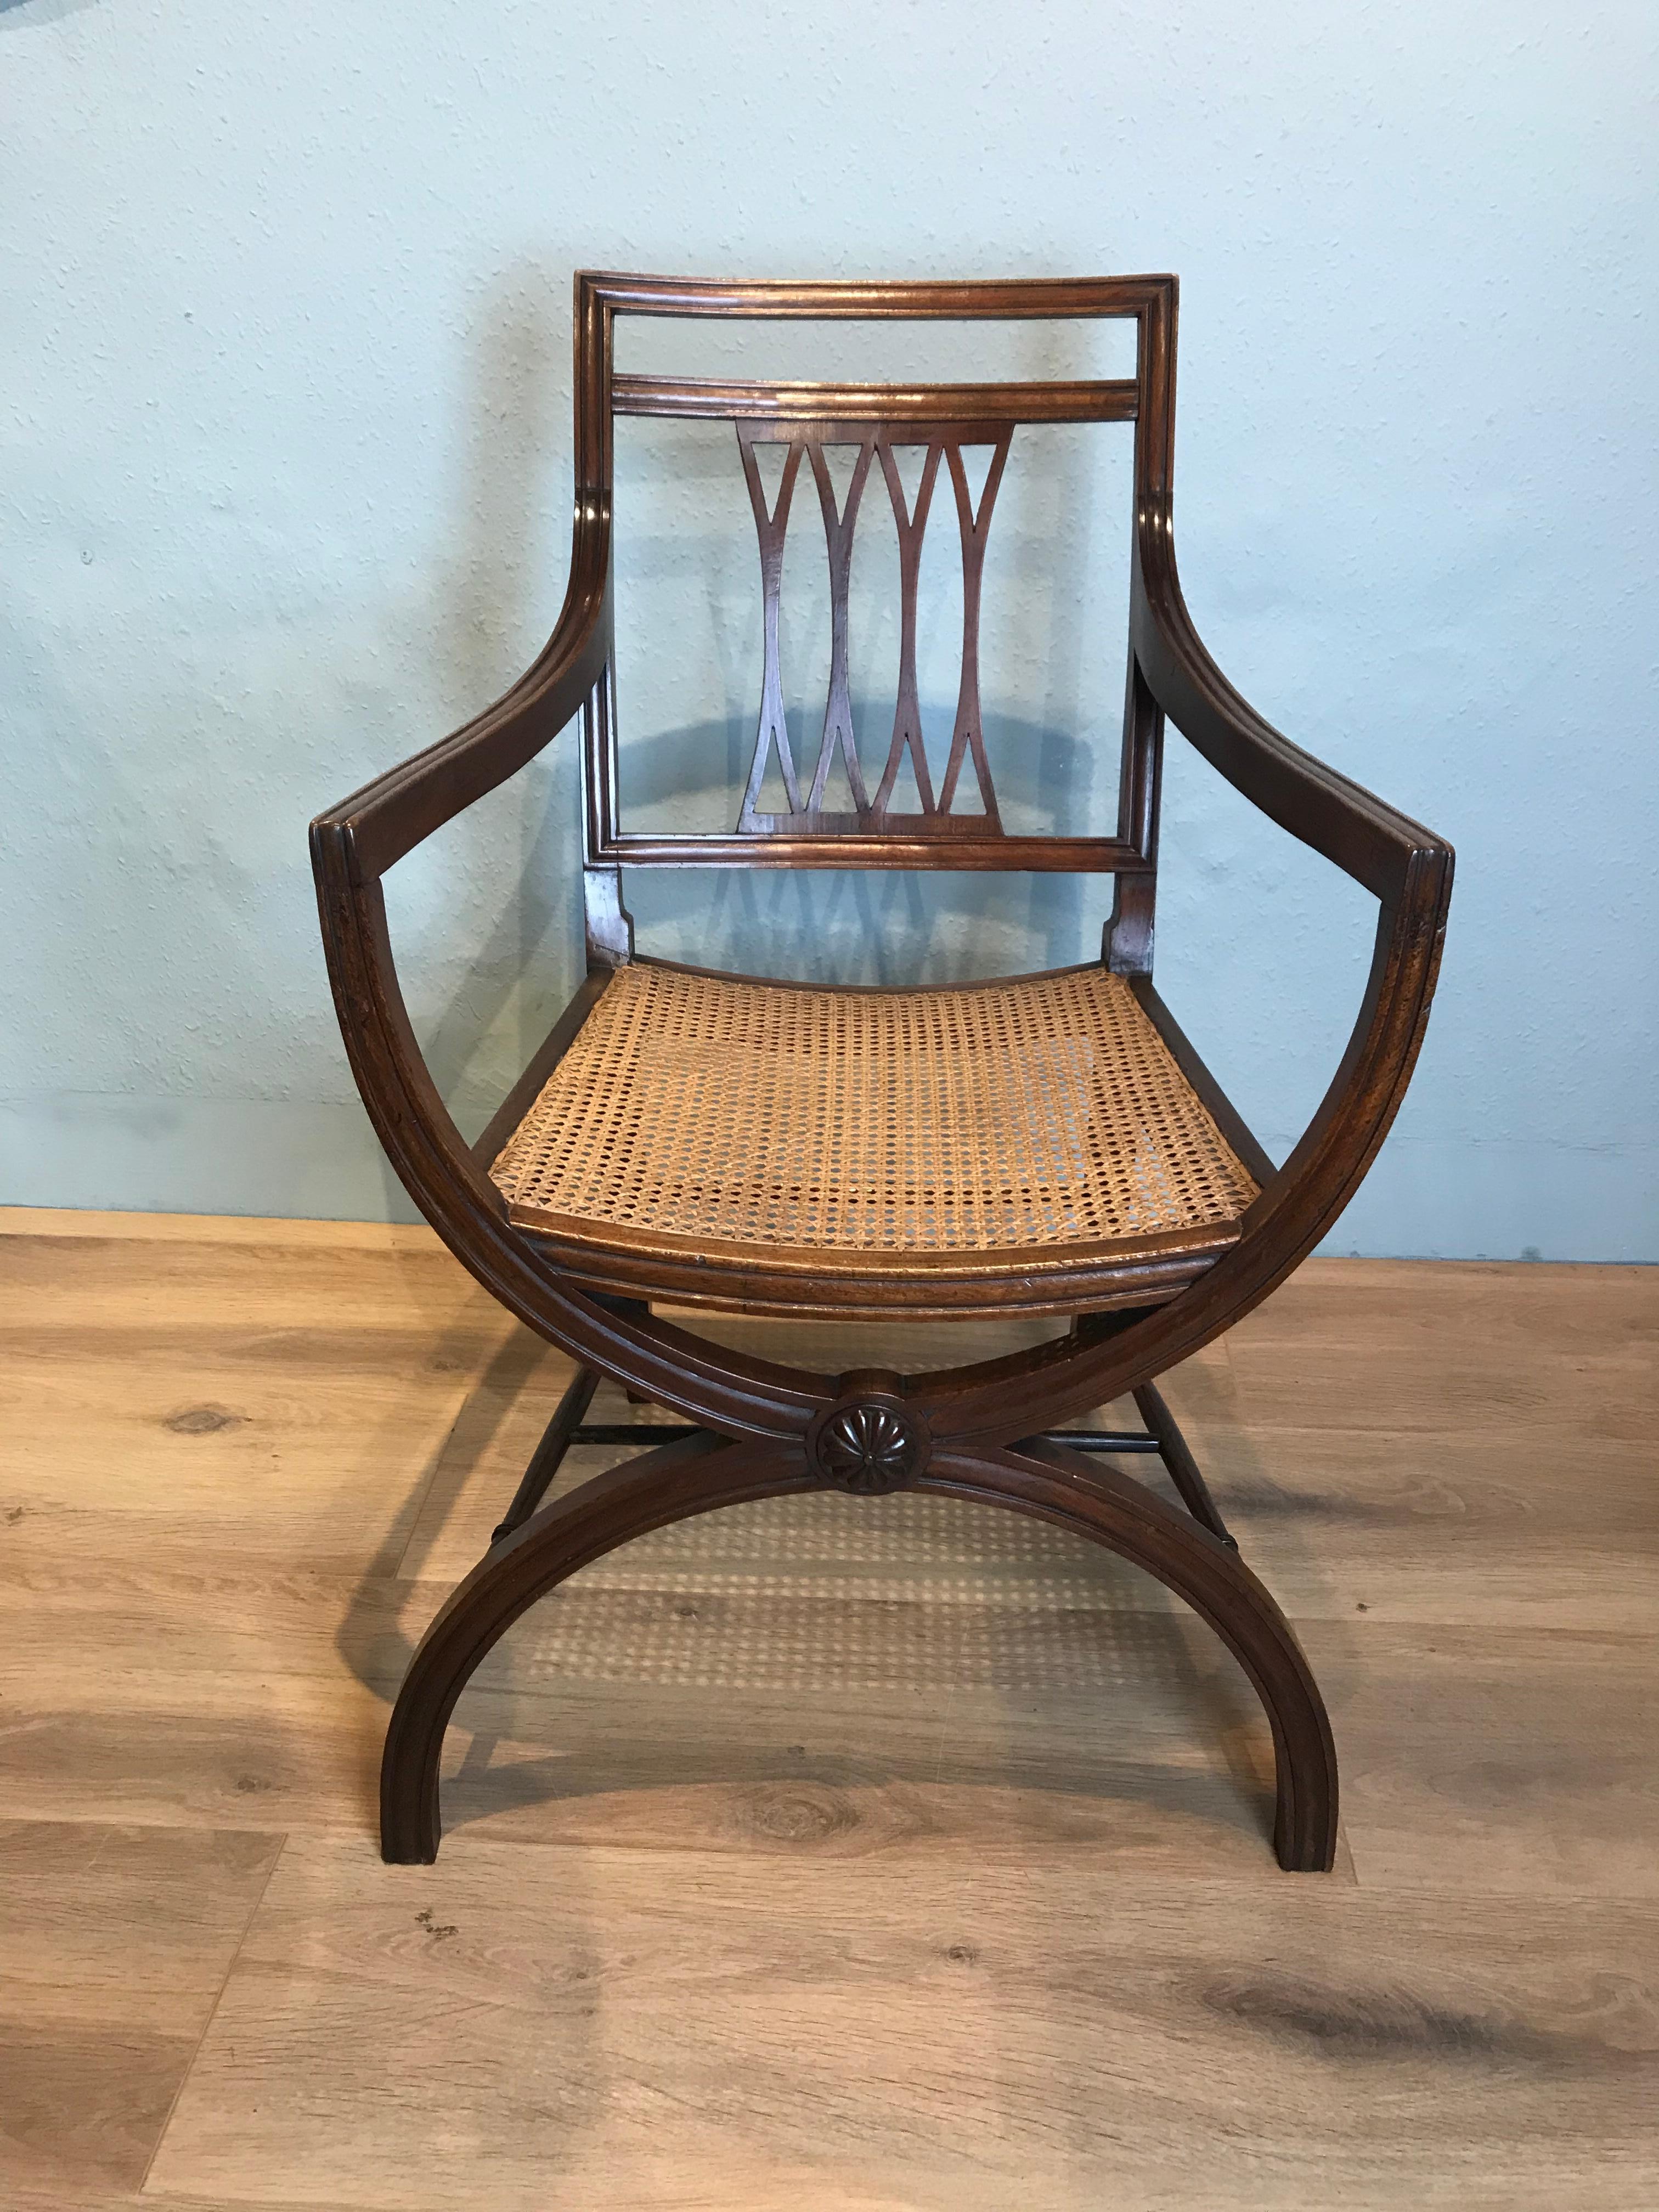 Mahogany Curule style open armchair in the manor of the design of Thomas. Hope. This attractive late 19th century chair has a moulded X frame facade with a central carved reeded randall, caned seat and lower turned H frame stretcher. This handsome